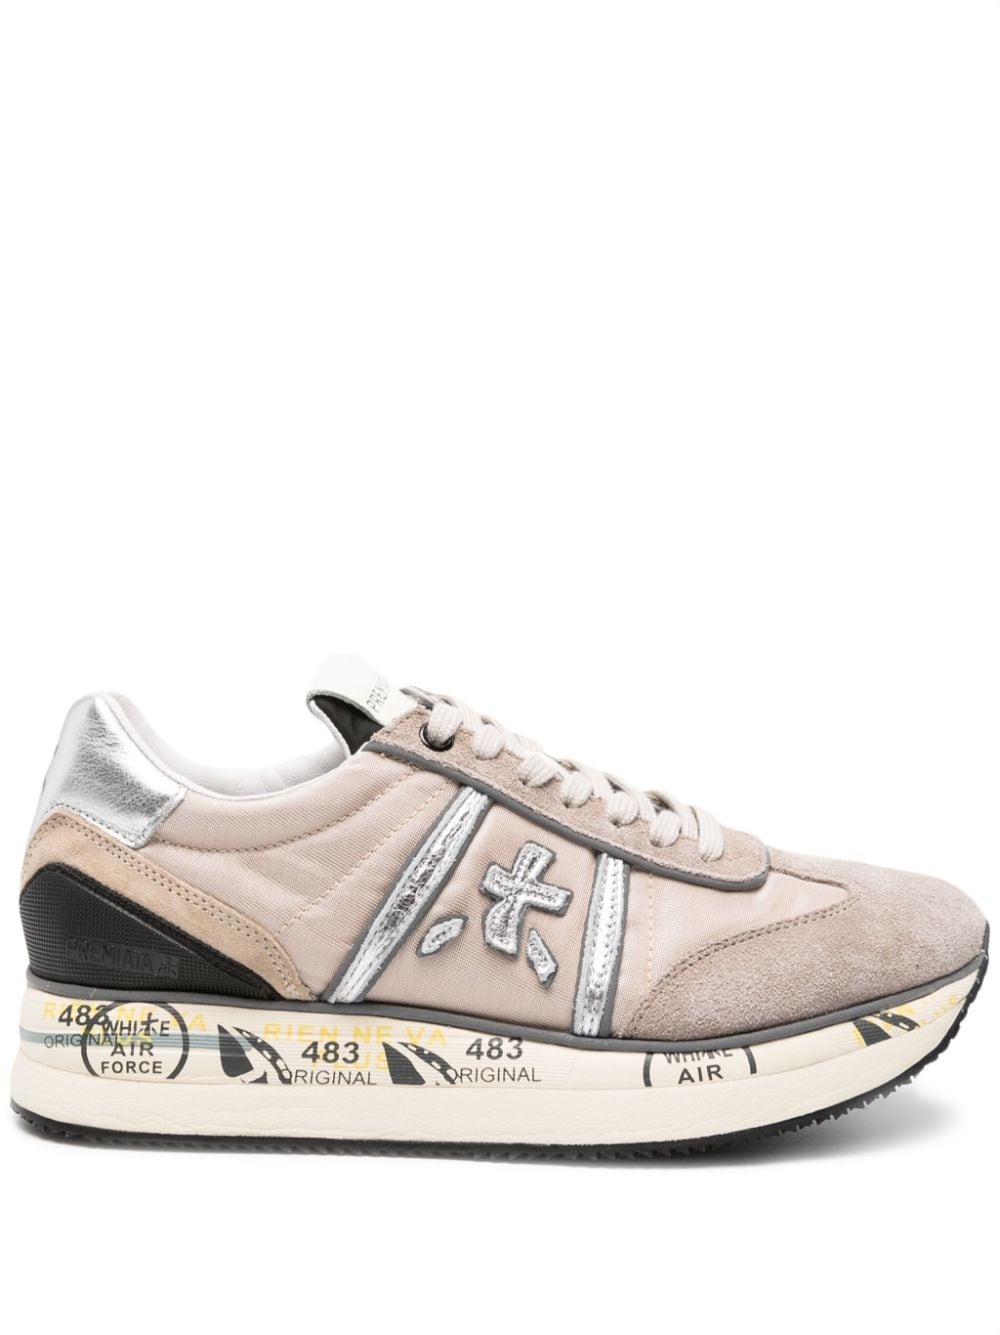 PREMIATA CONNY 6491 LACE-UP SNEAKERS